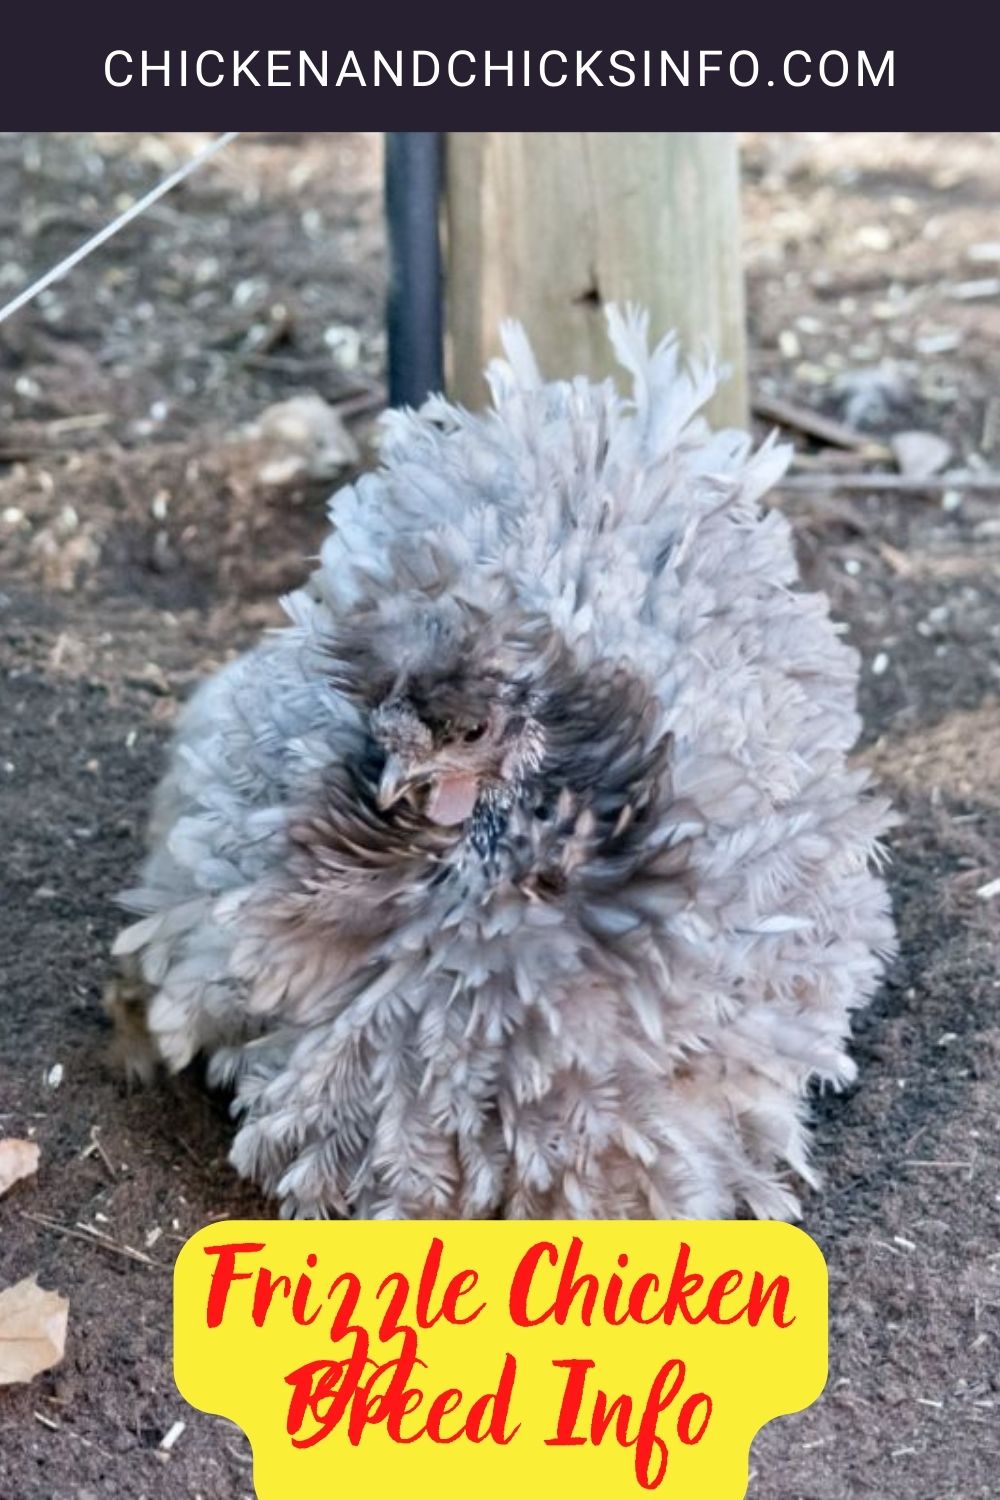 Frizzle Chicken Breed Info pinterest image.